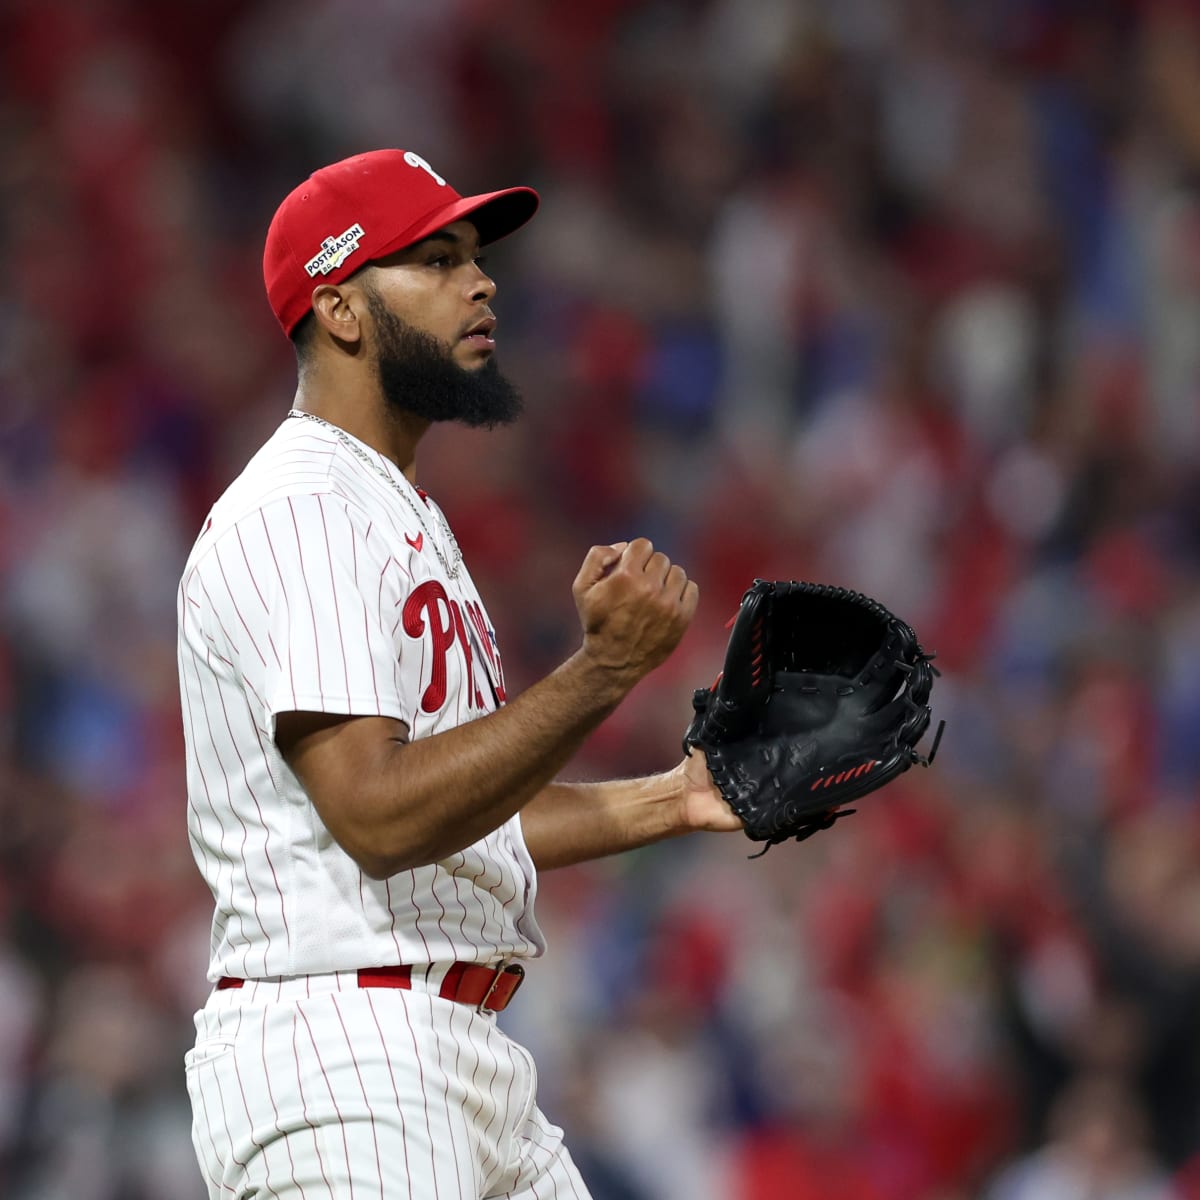 Seranthony Dominguez continues stellar start to career in Phillies